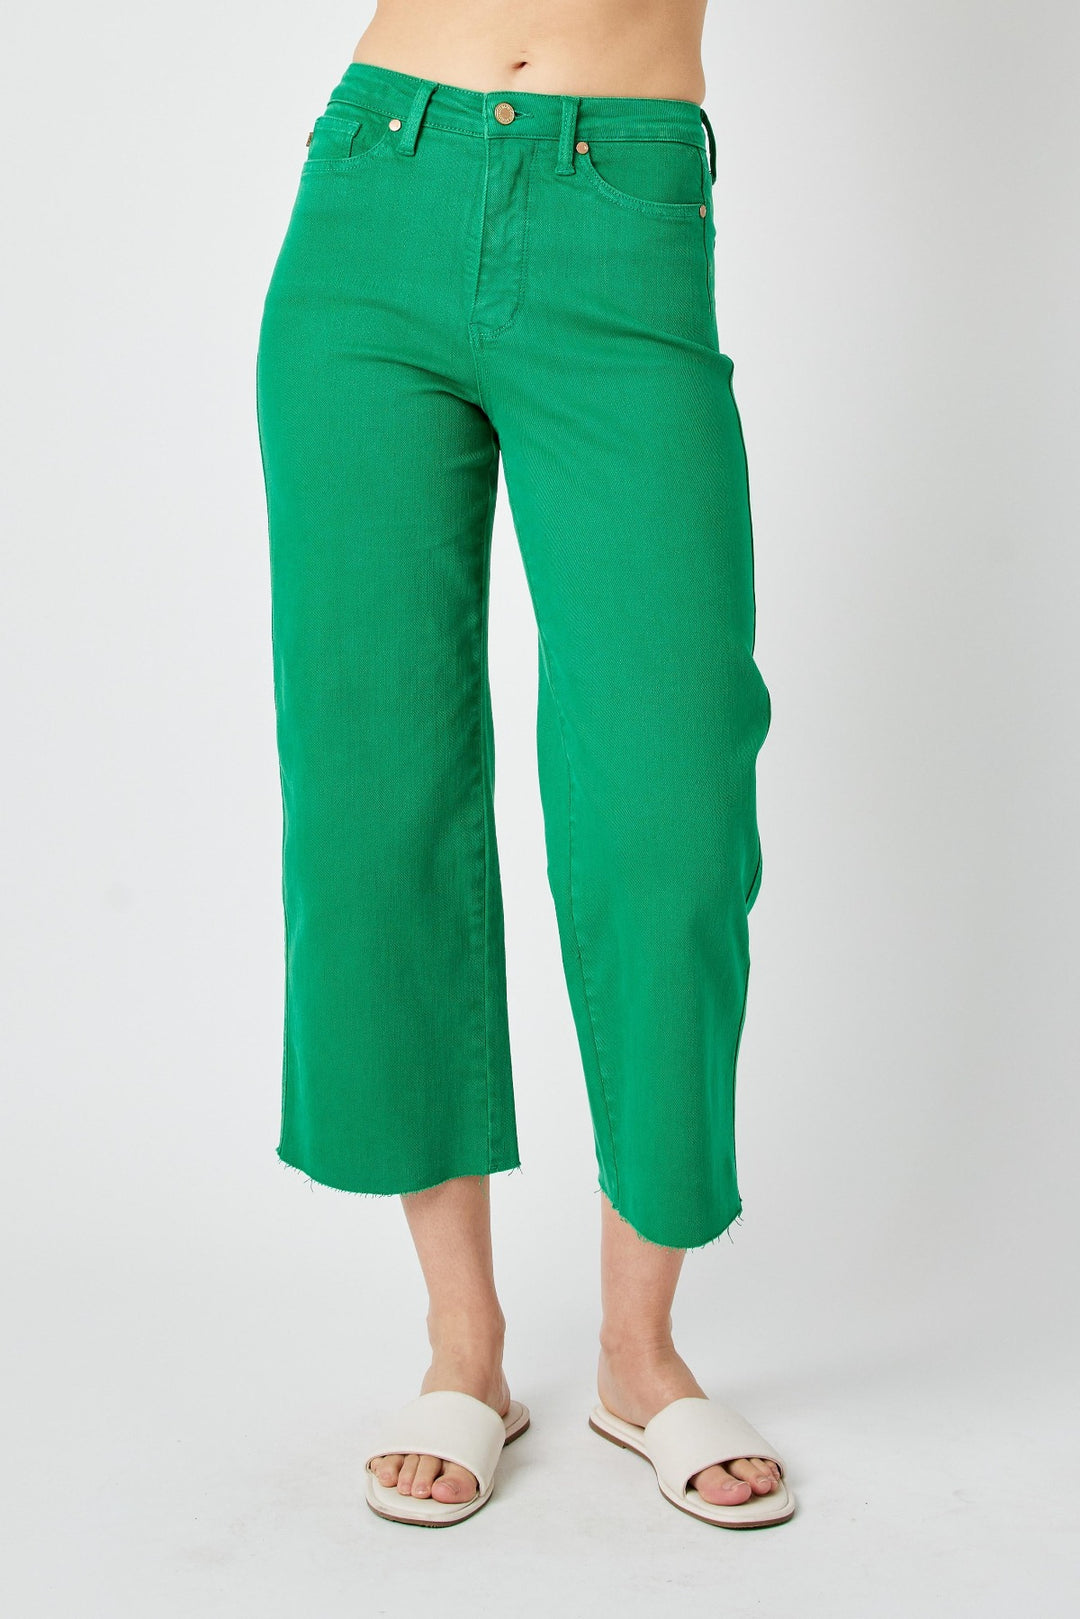 Judy Blue Green Jeans - Wide Leg - Cropped - Inspired Eye Boutique